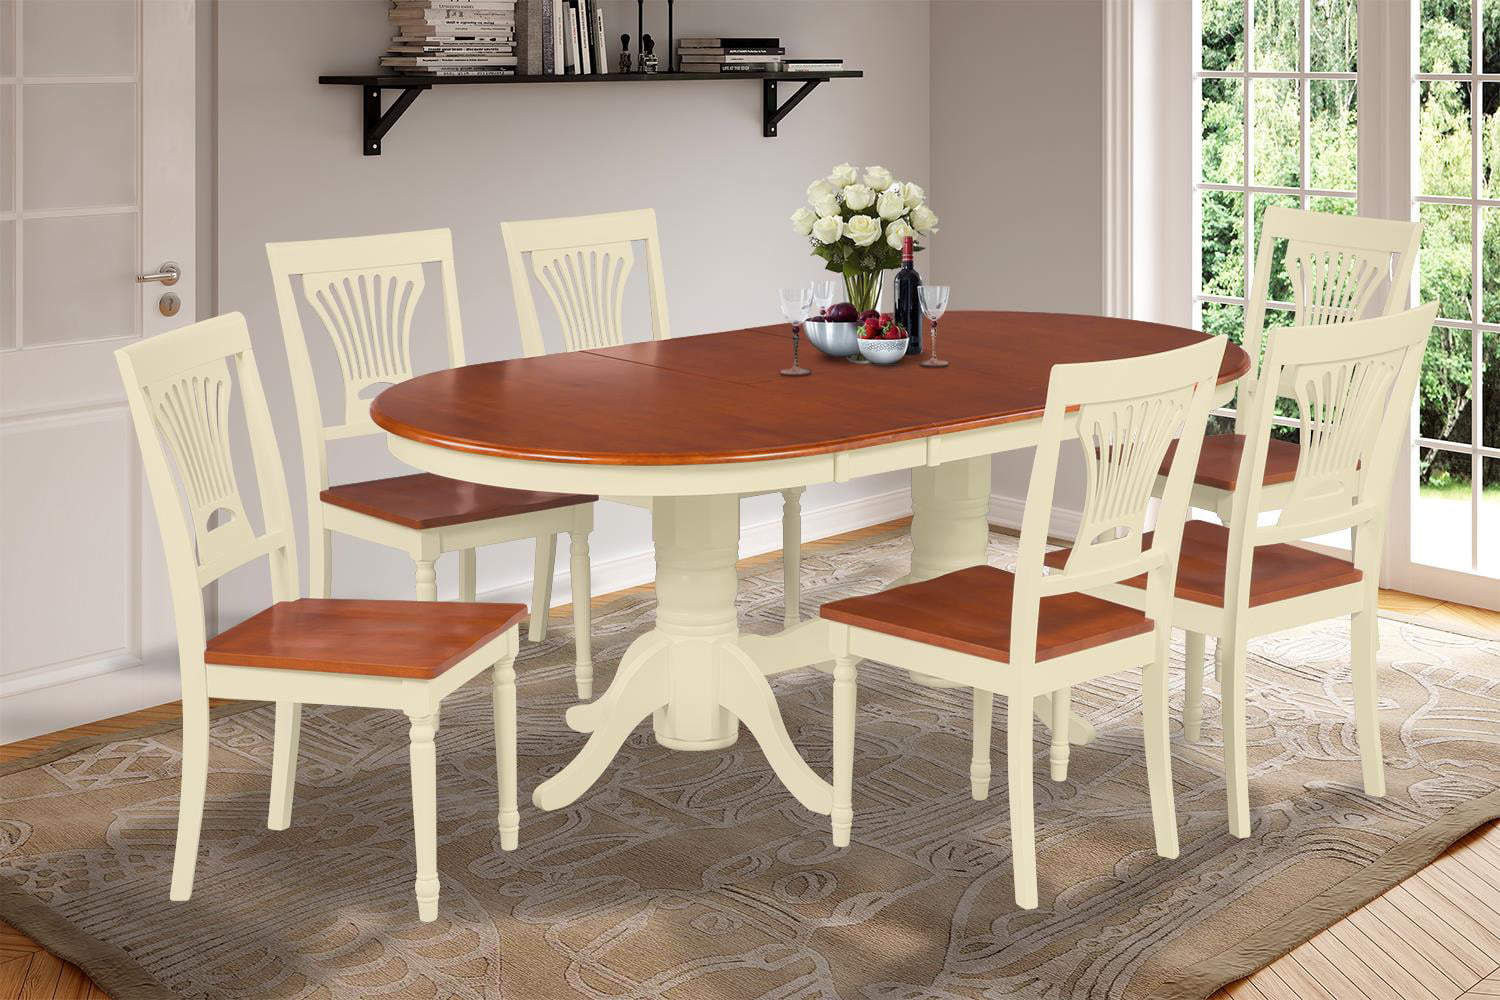 Dining Room Table With Leaf And 6 Chairs